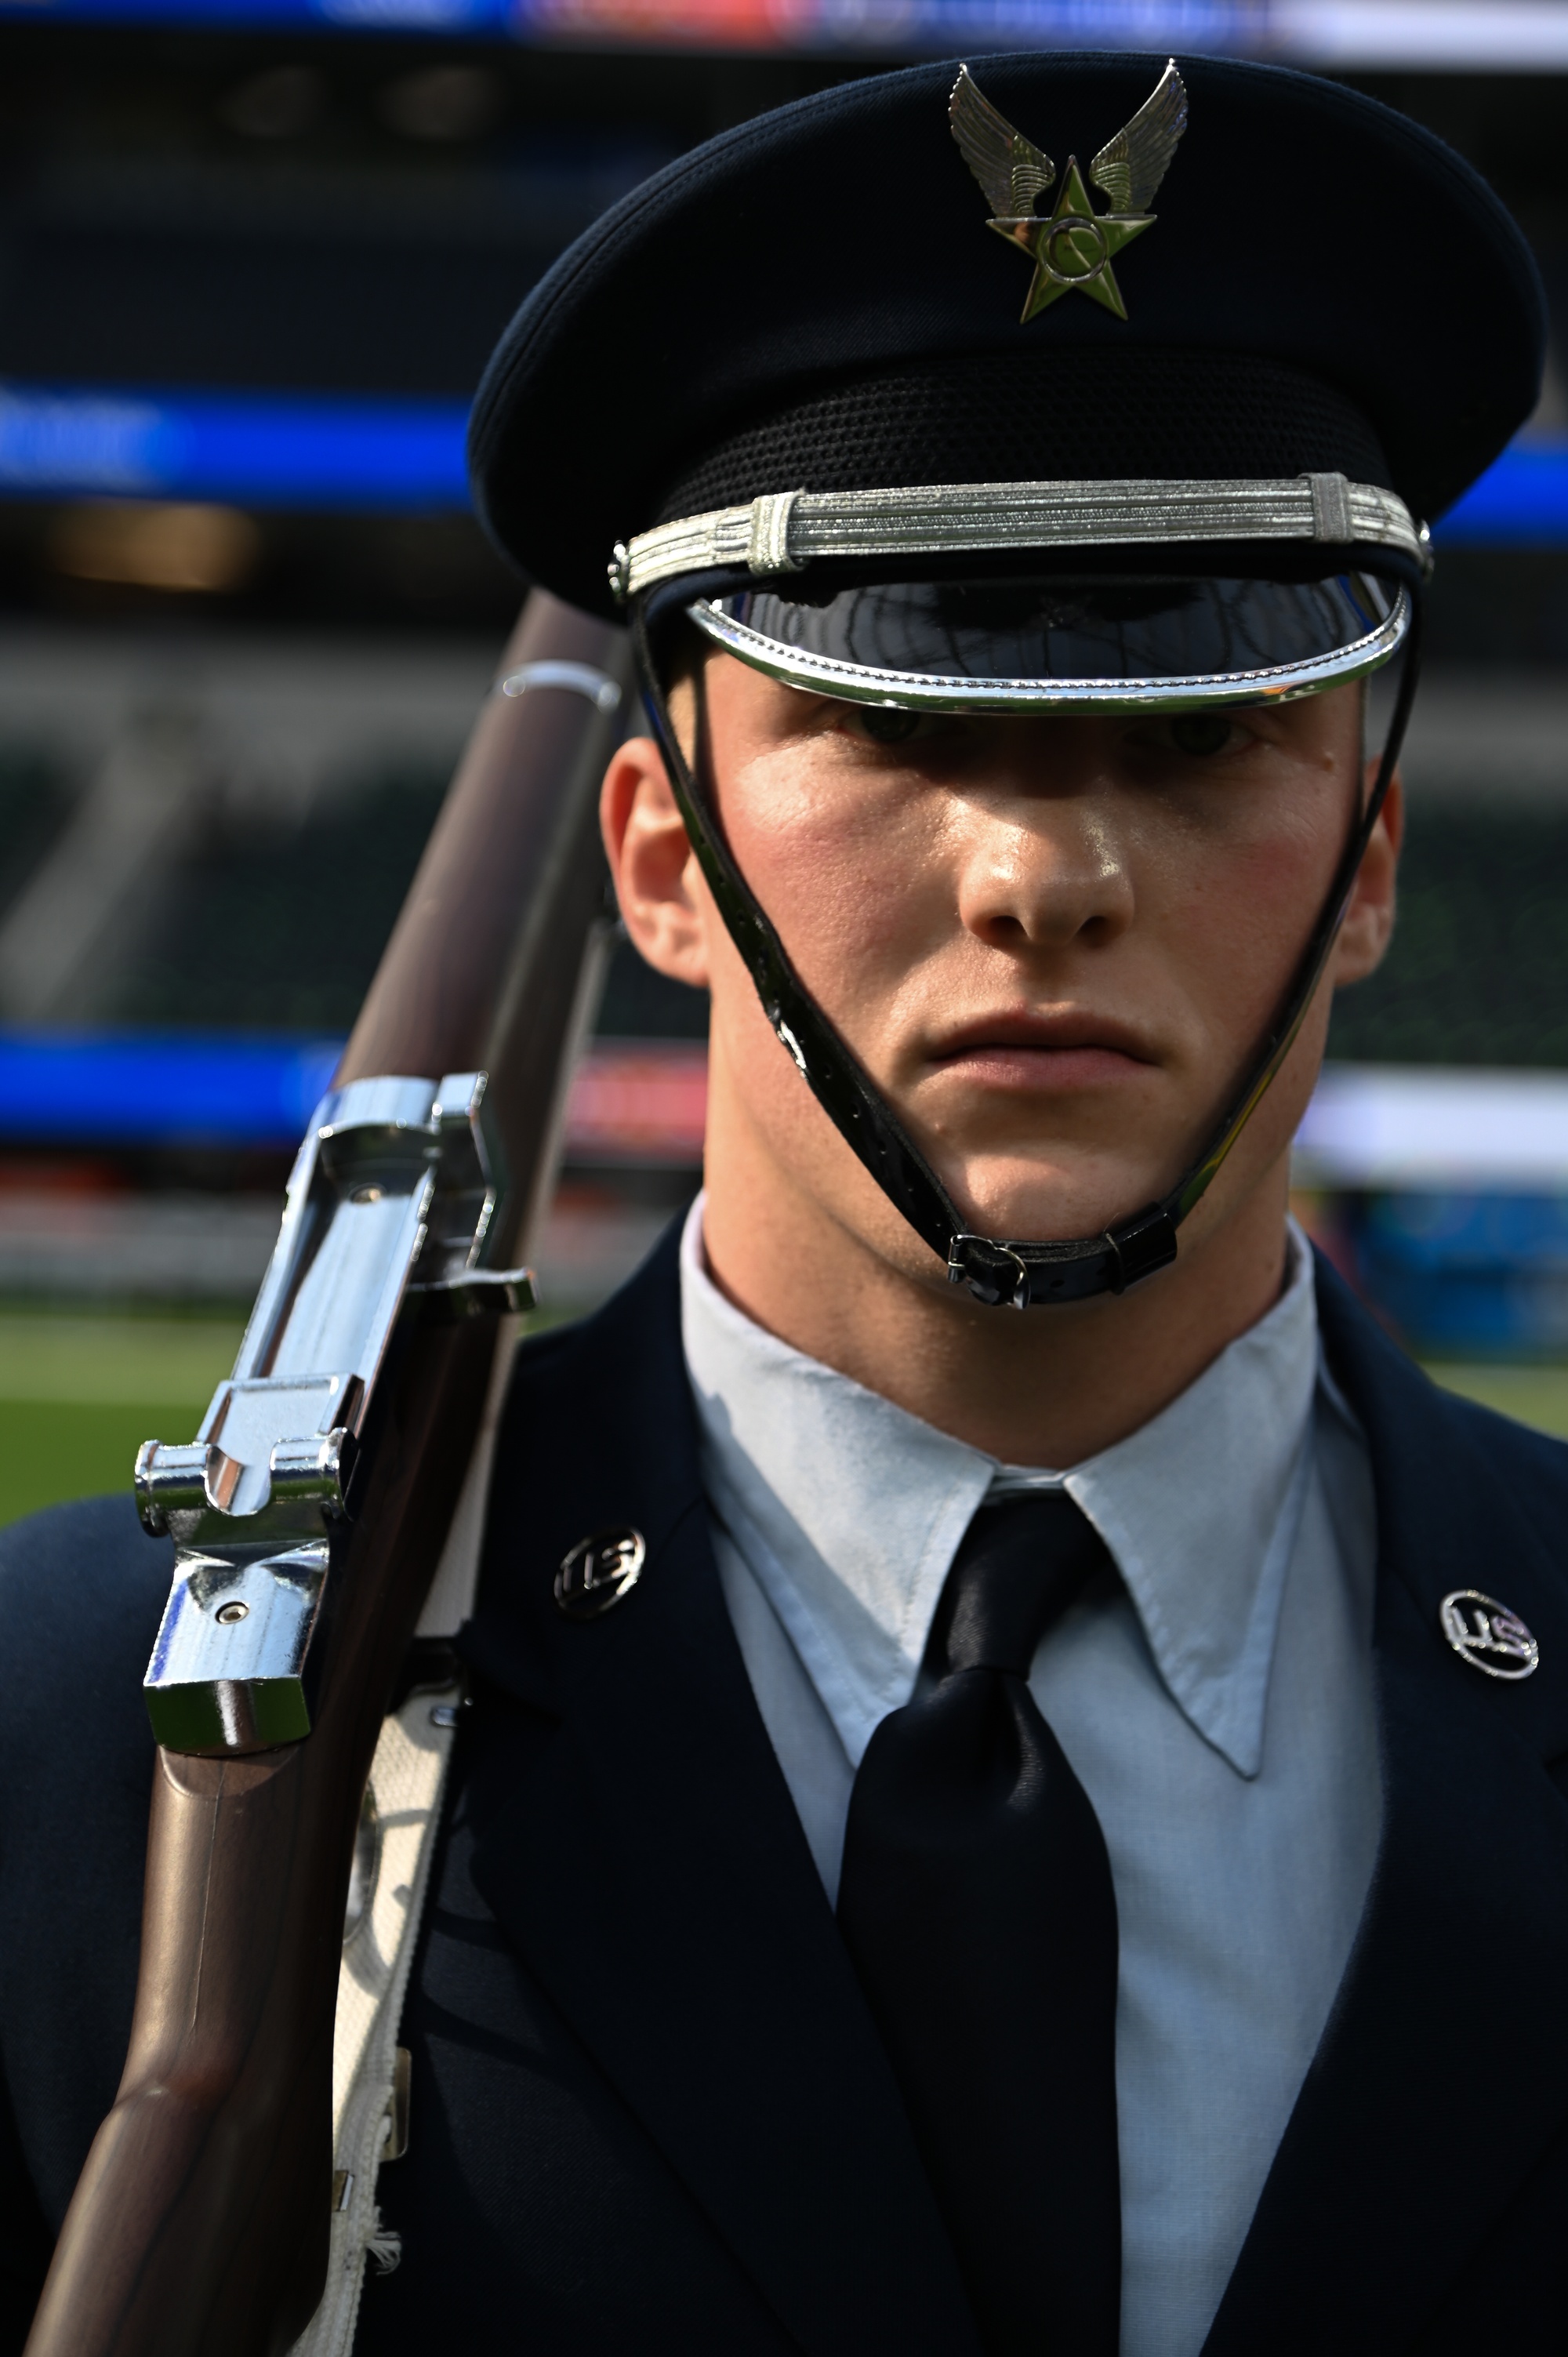 DVIDS - Images - Vandenberg's Honor Guard Presents the Colors at Rams Game  on Christmas Day [Image 7 of 10]